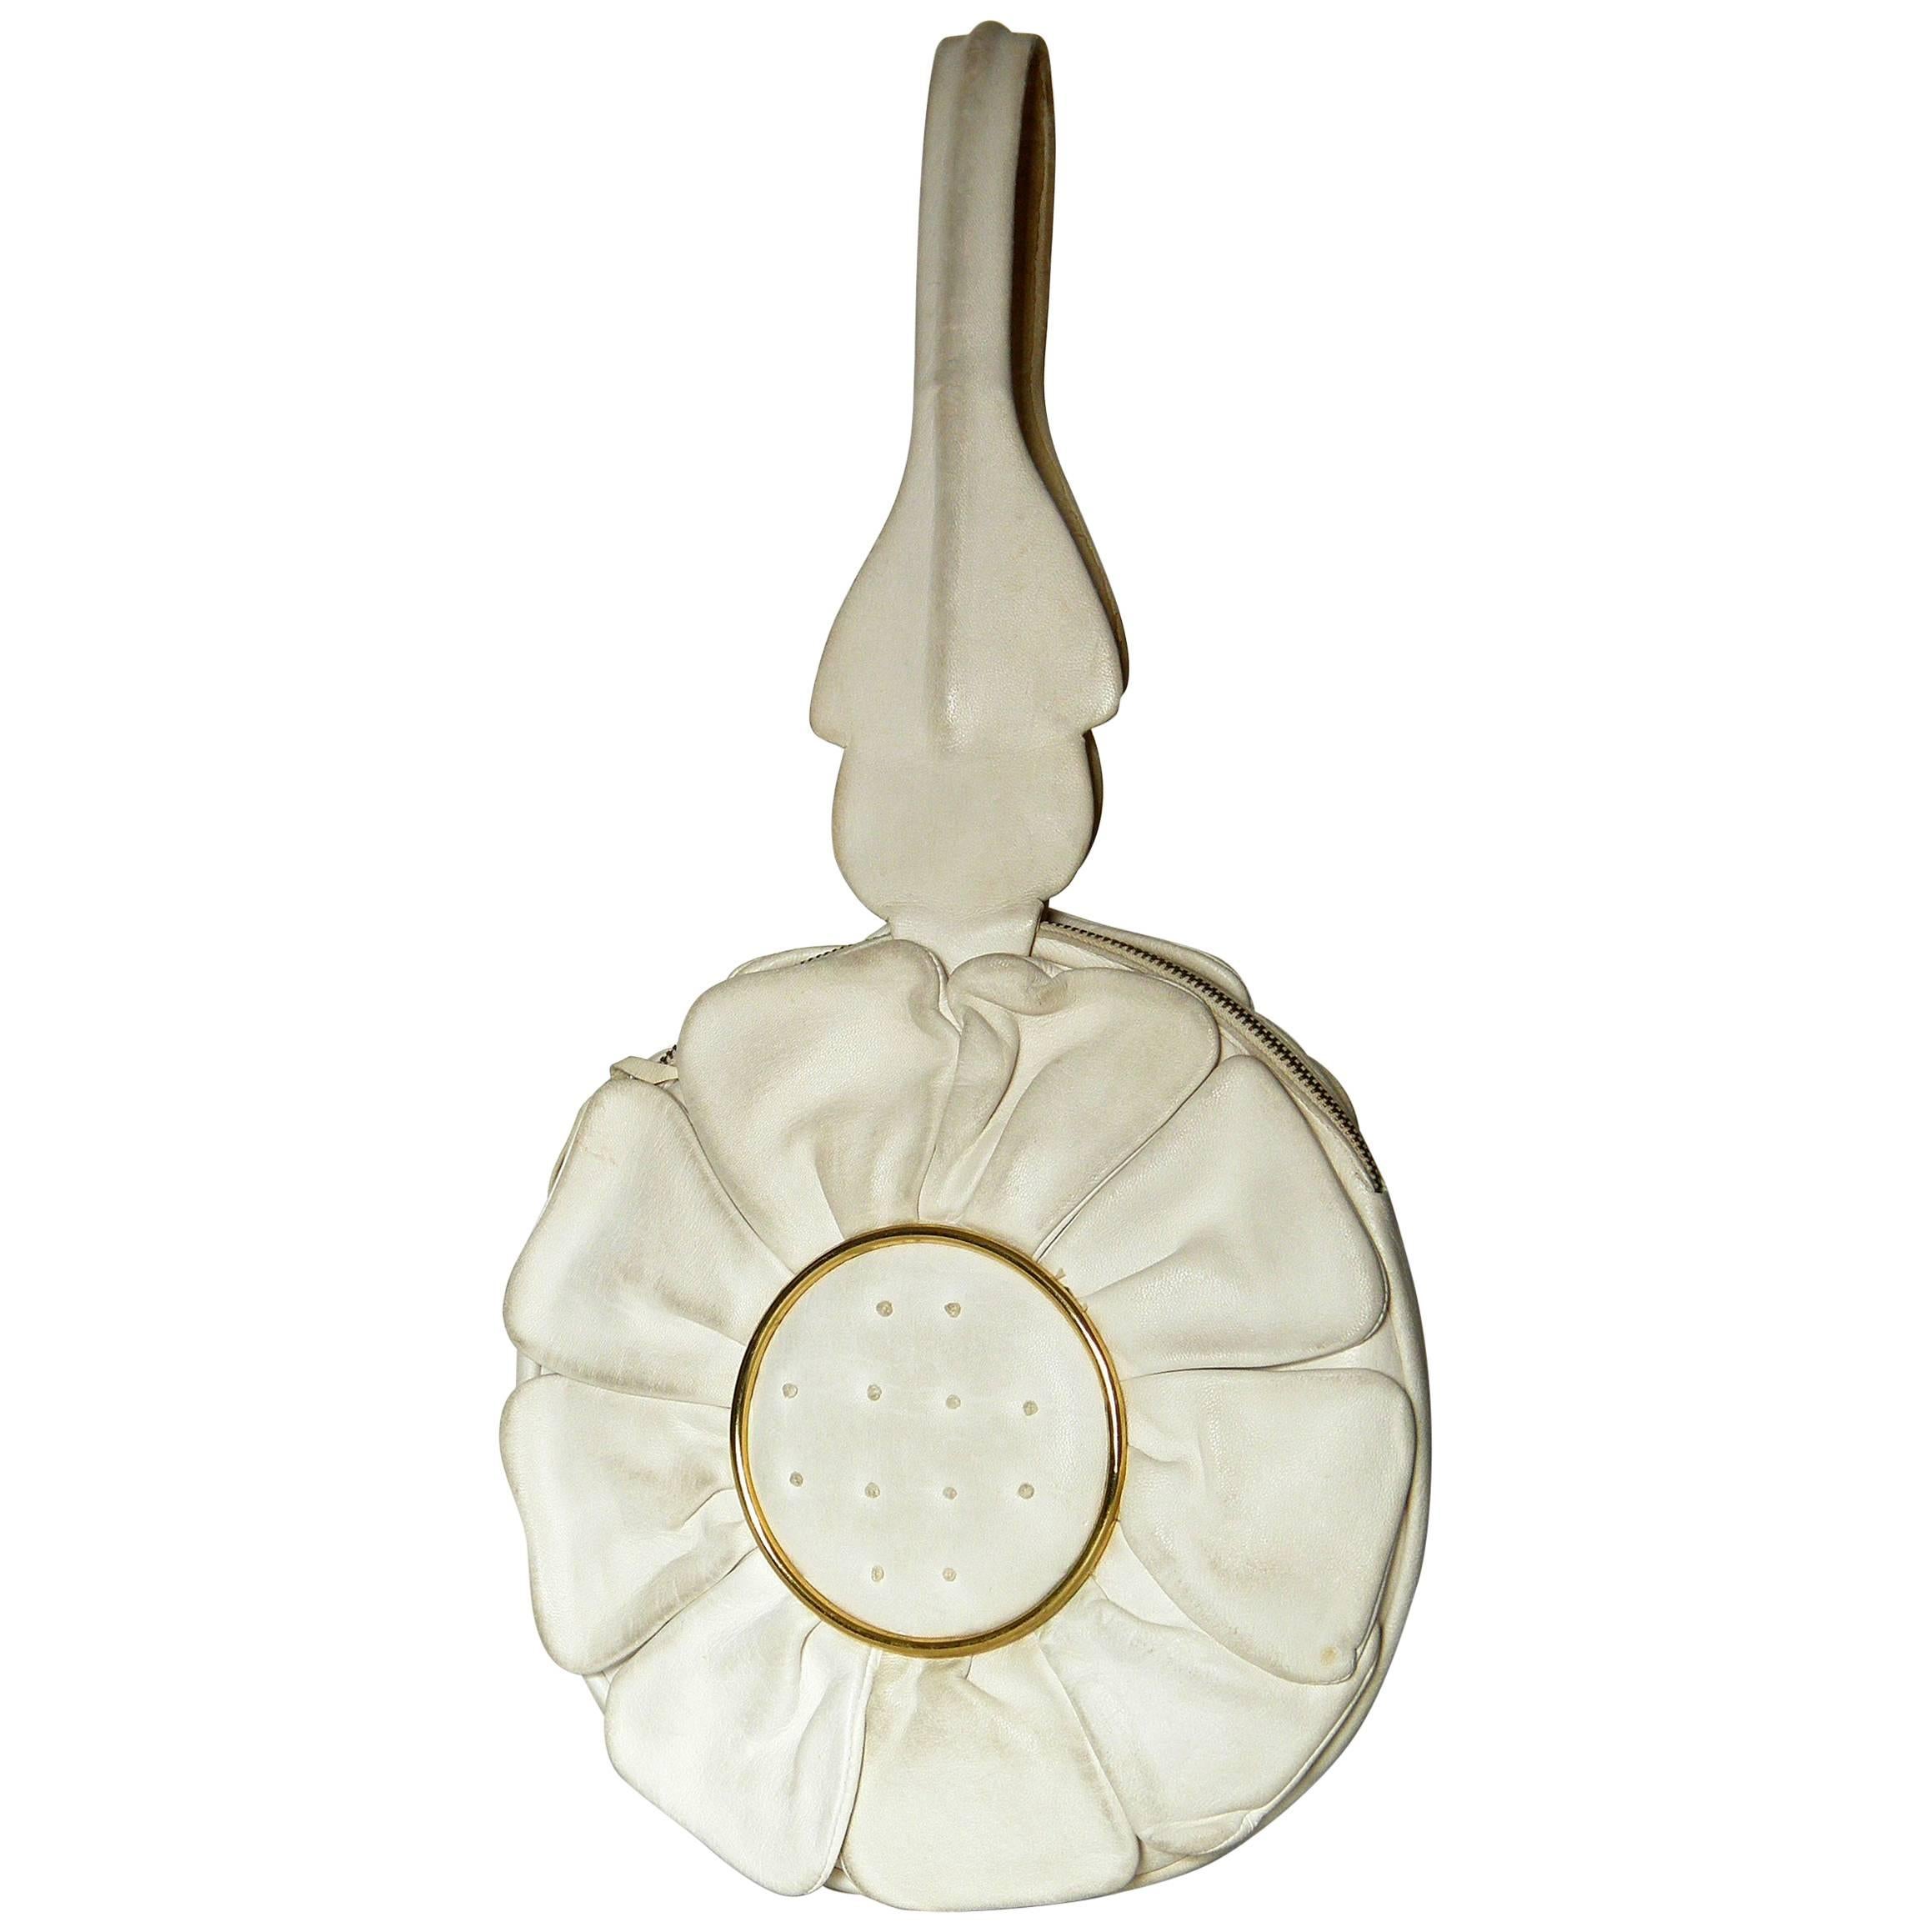 Flower Shaped Handbag in Cream Leather with Gilt Metal Accents